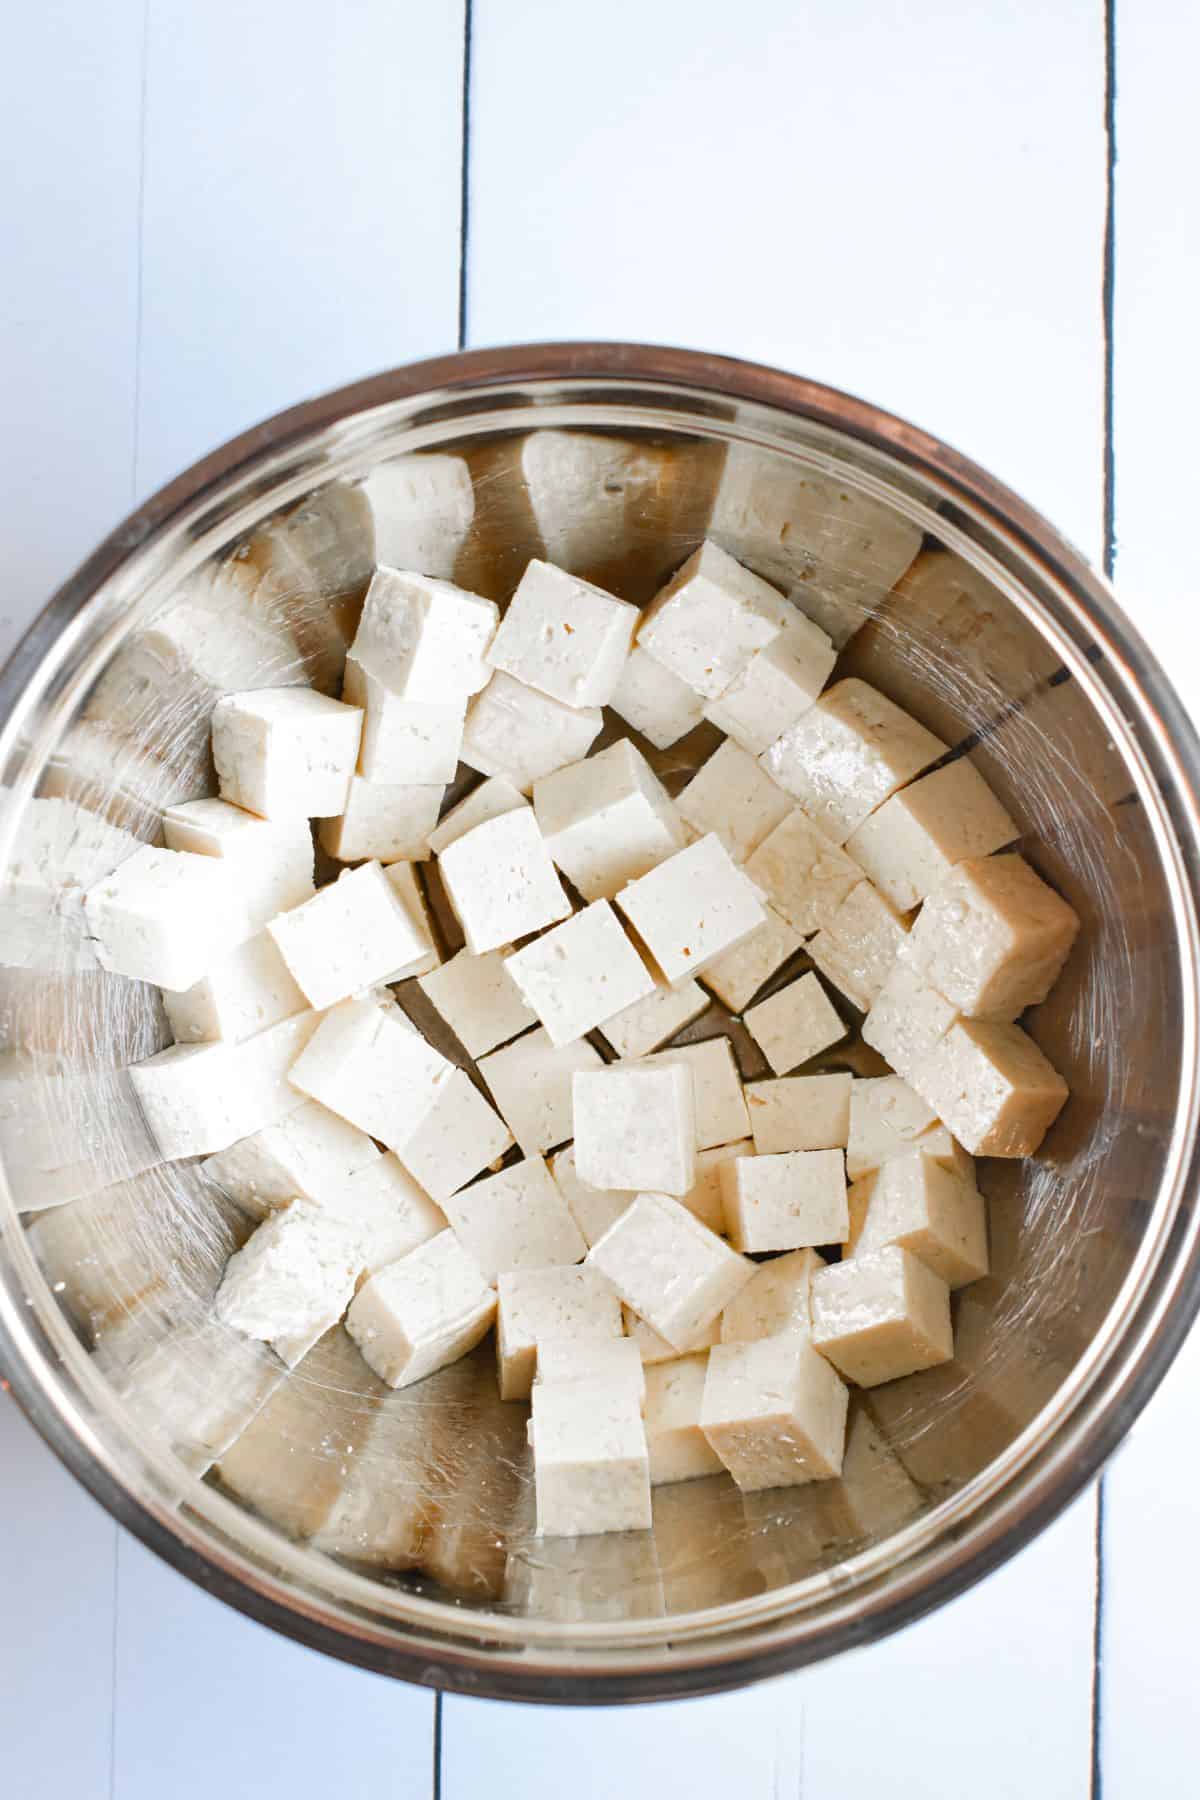 Tofu cut into cubes in a mixing bowl.